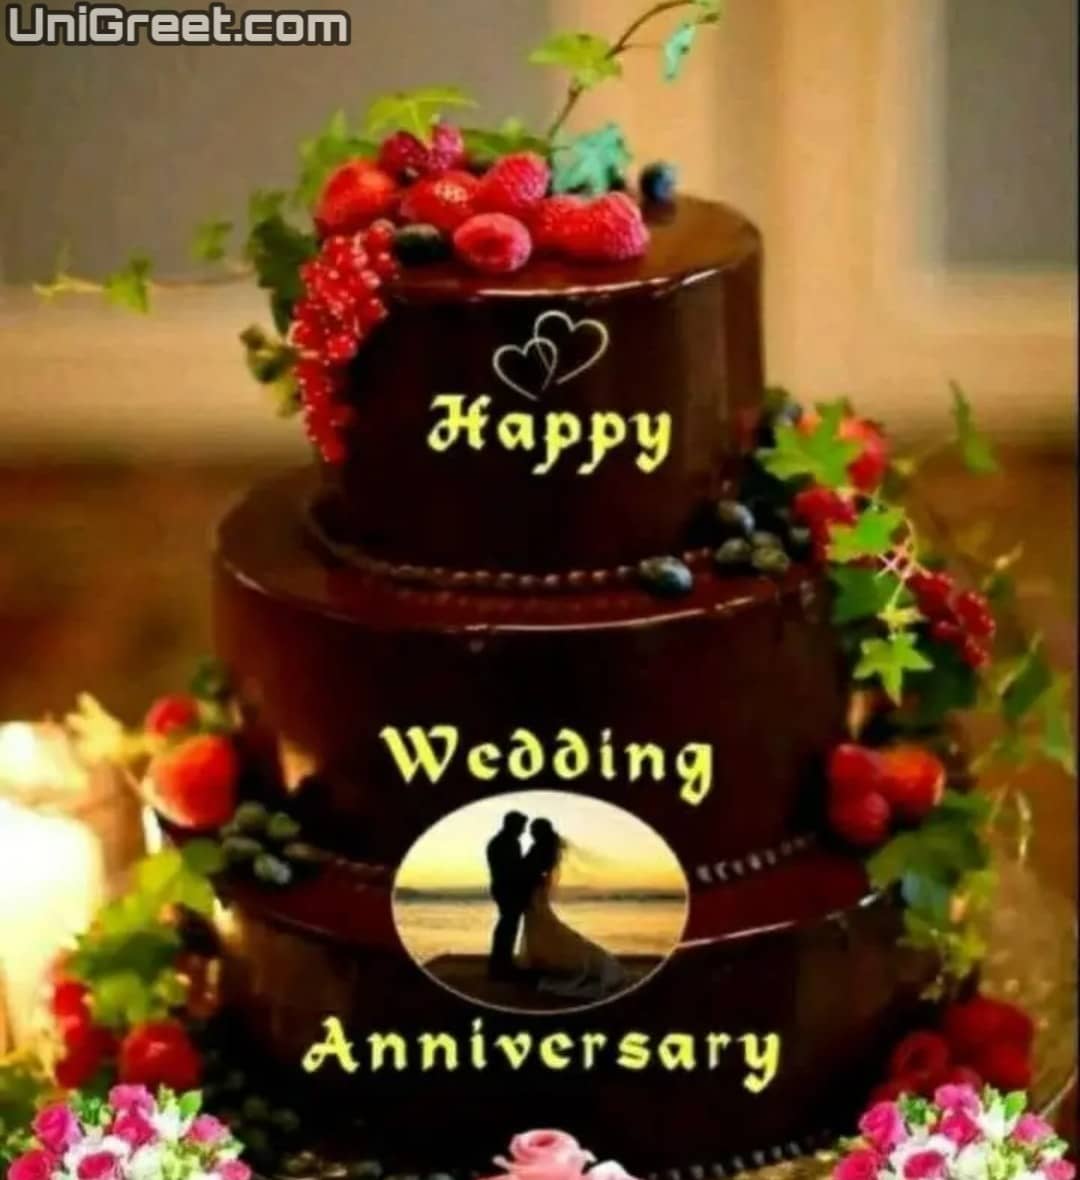 “Incredible 4K Collection of 999+ Marriage Anniversary Cake Images for WhatsApp”